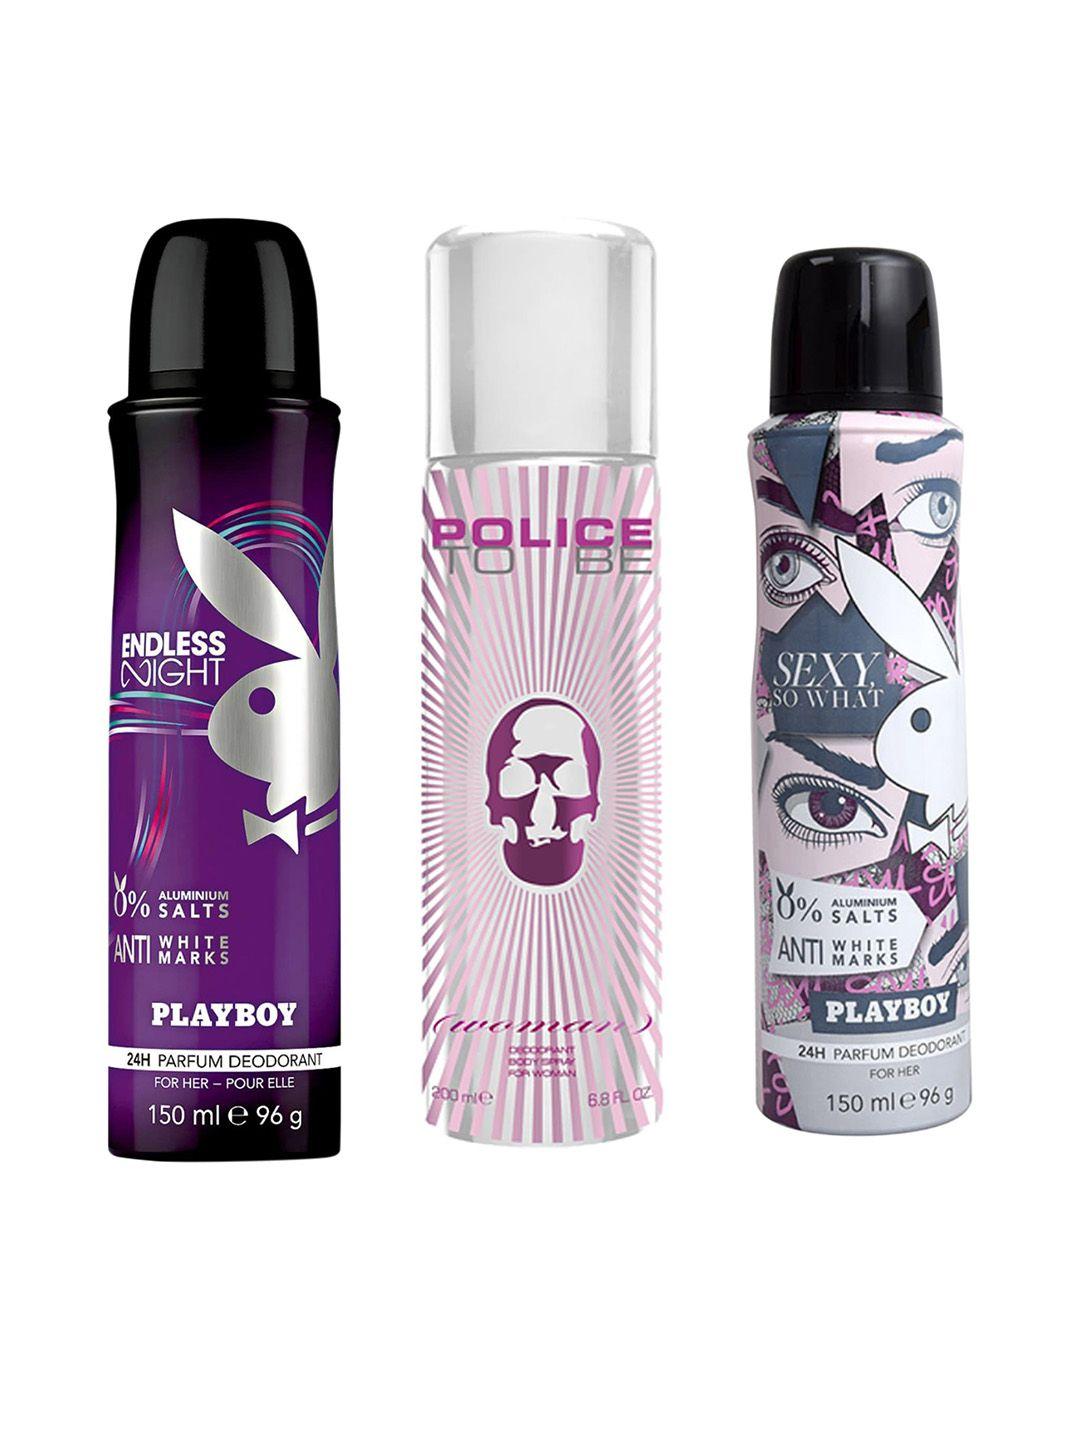 playboy set of 3 set of 3 parfum deos - endless night, police to be & sexy so what 500 ml